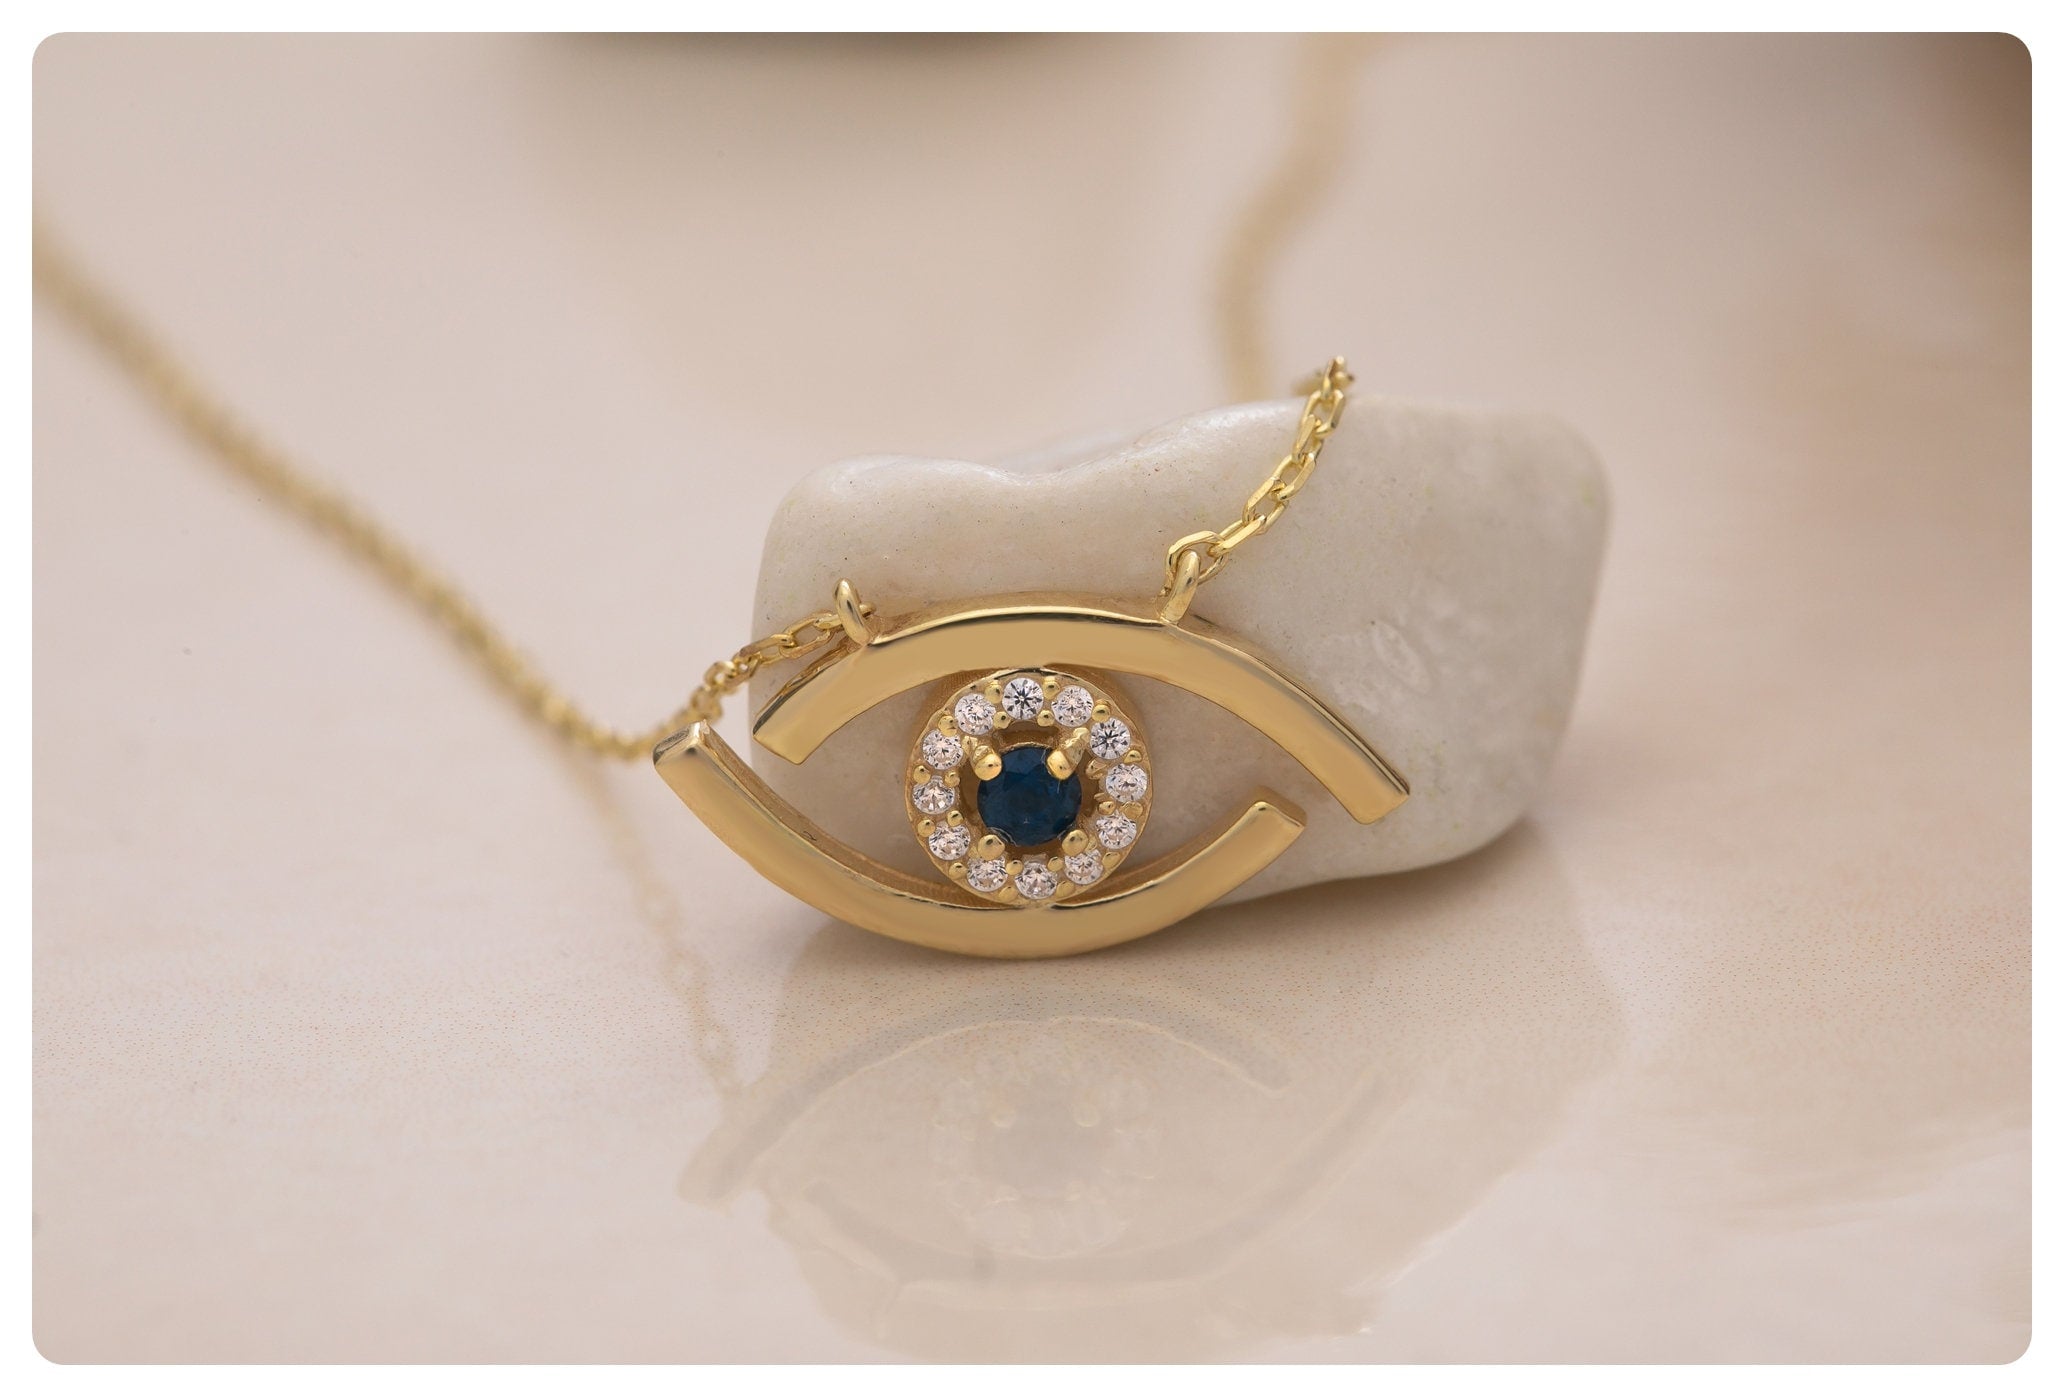 Gold Evil Eyes Necklace, 925 Silver Protection Pendant with Blue Enamel, Dainty Evil Eye Jewelry, Spiritual Amulet, Talisman Charm Necklace